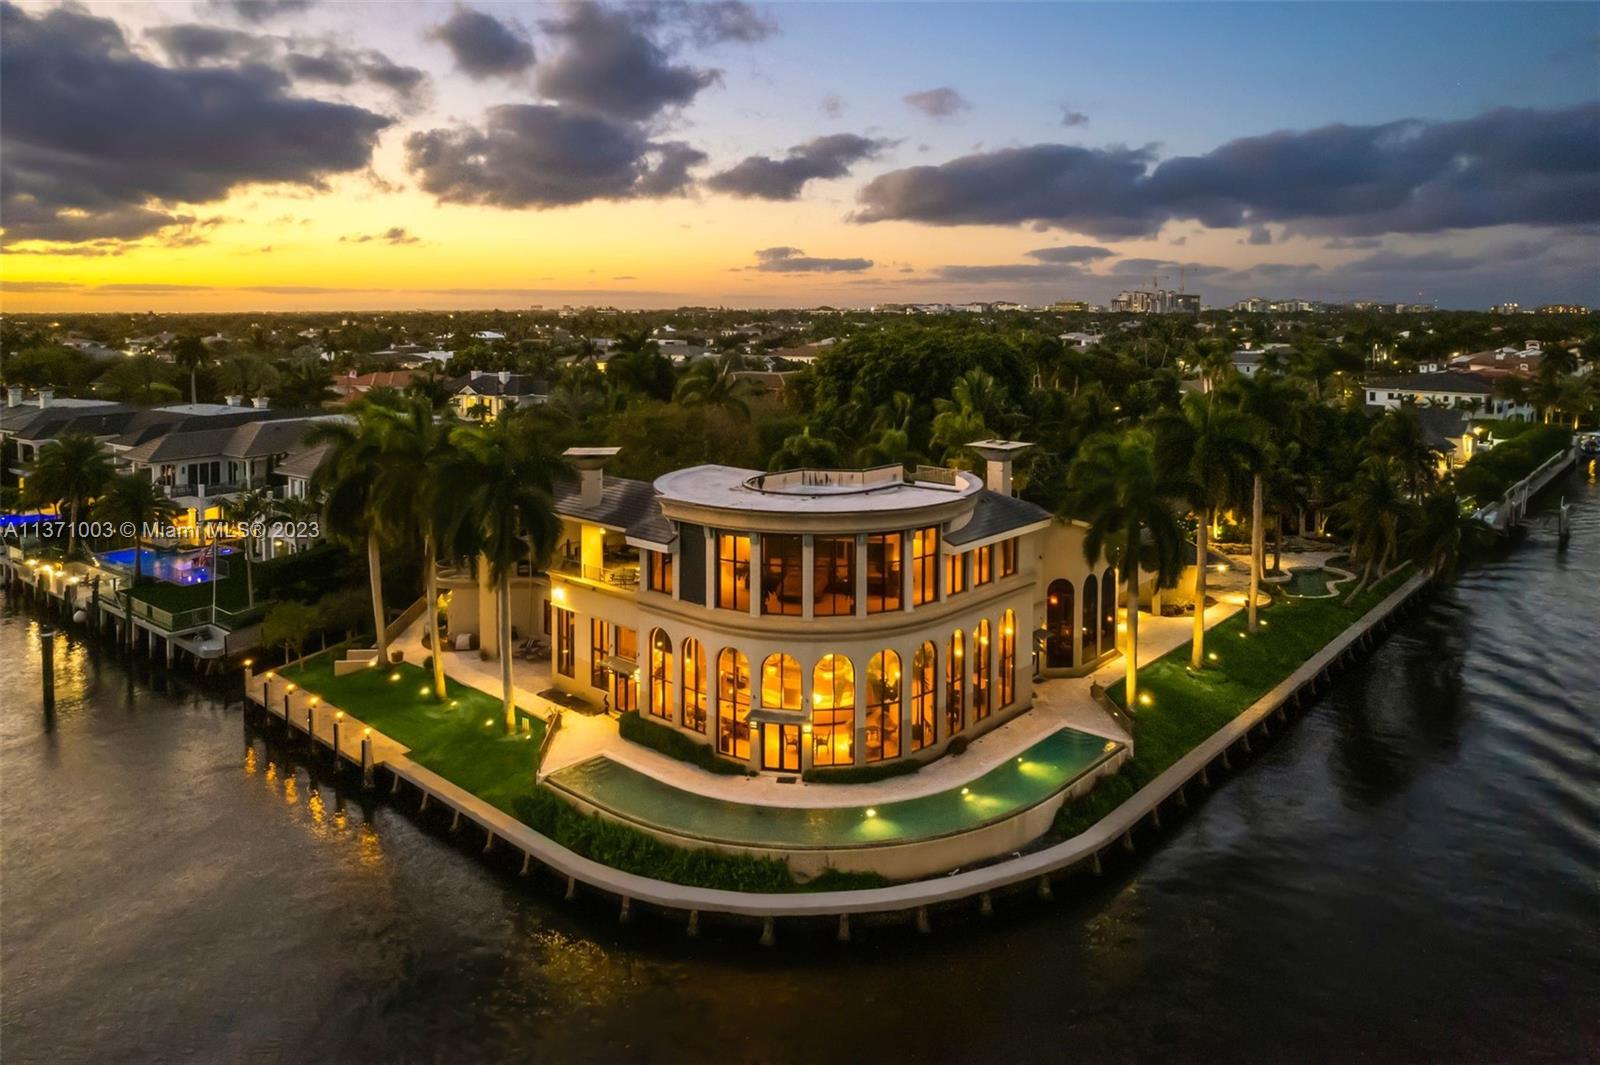 Once in a generation opportunity to own over an acre of waterfront land in the prestigious Royal Palm Yacht & Country Club. For a savvy buyer to build a WF retreat w/ endless design opportunities. SE facing corner lot; 437’ of WF overlooking the Intracoastal Waterway; vacant 0.4-acre lot across the street. The Parker Estate, designed by celebrated architect Mitch Kunik, draws inspiration from tropical resort living & balances luxury, nature, & privacy. Features a 10,000 SF main house & separate guest house resembling bungalows at Little Palm Island resort. The outdoor area features 2 pools, covered patio, surrounded by beautifully landscaped grounds designed by horticulturist Craig Morell. Own one of South Florida's most remarkable homes, steeped in history & unmatched in location.